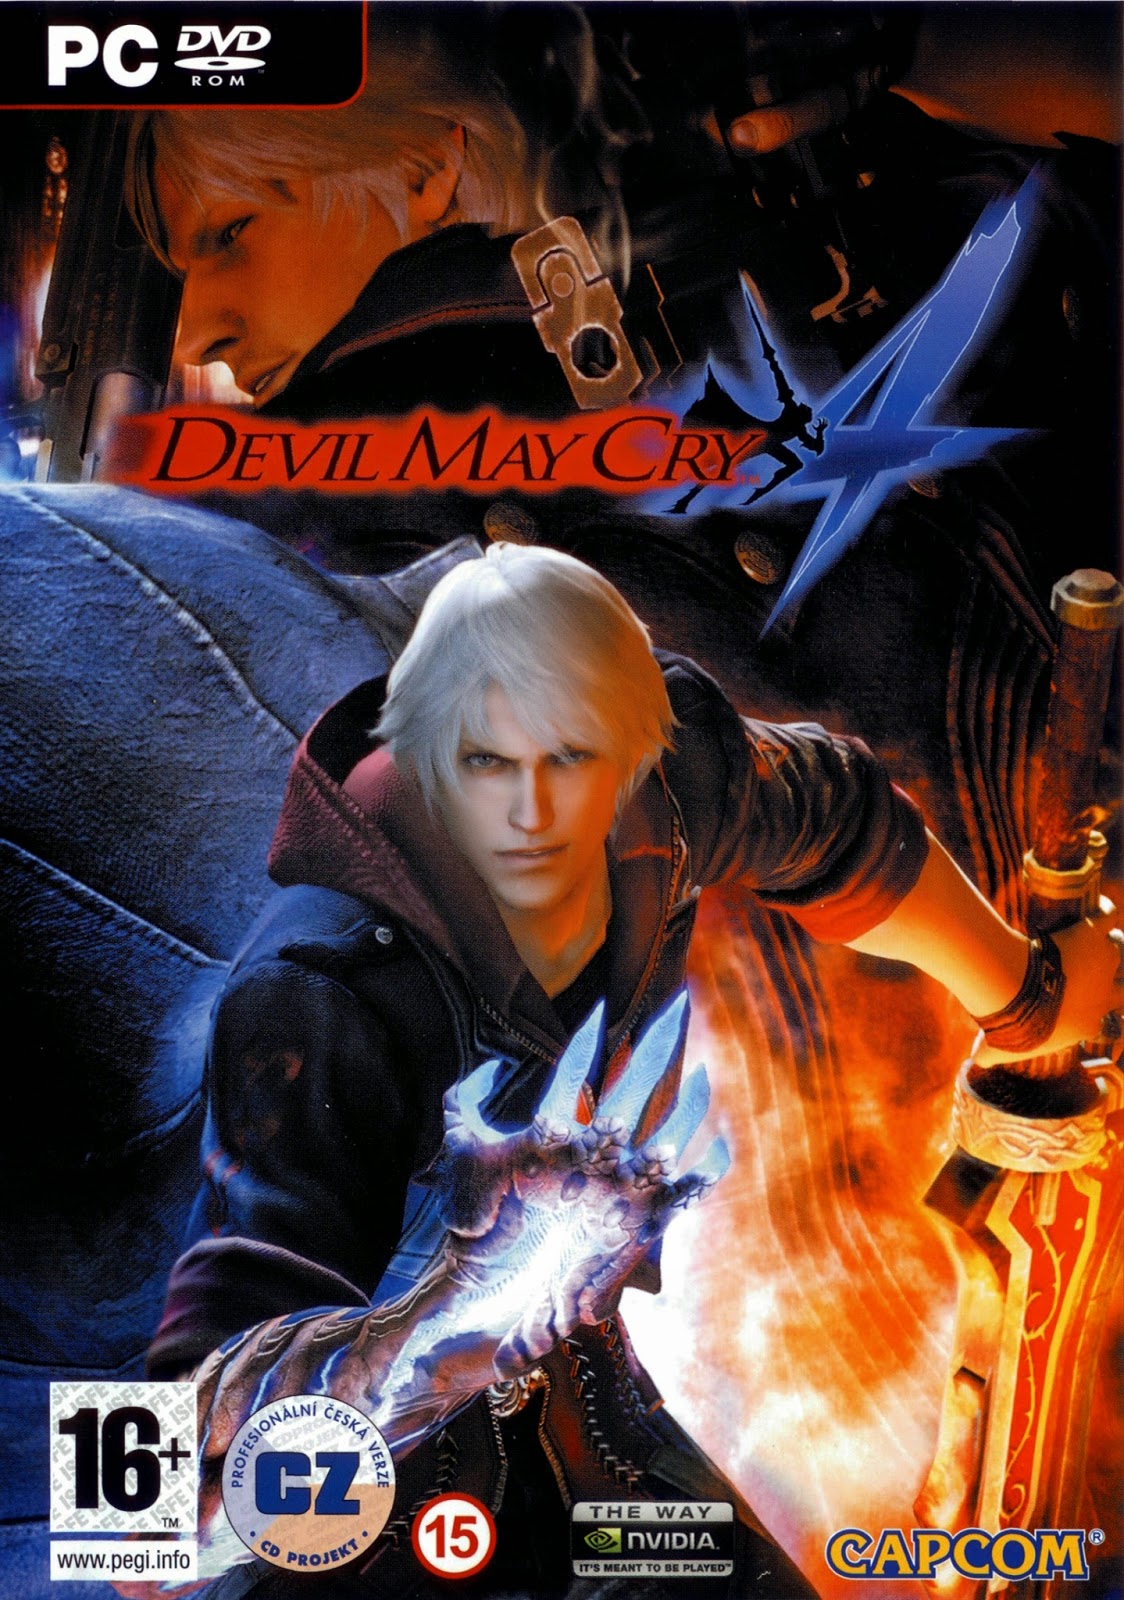 Devil May Cry 5 Pc Game Free Download Highly Compressed